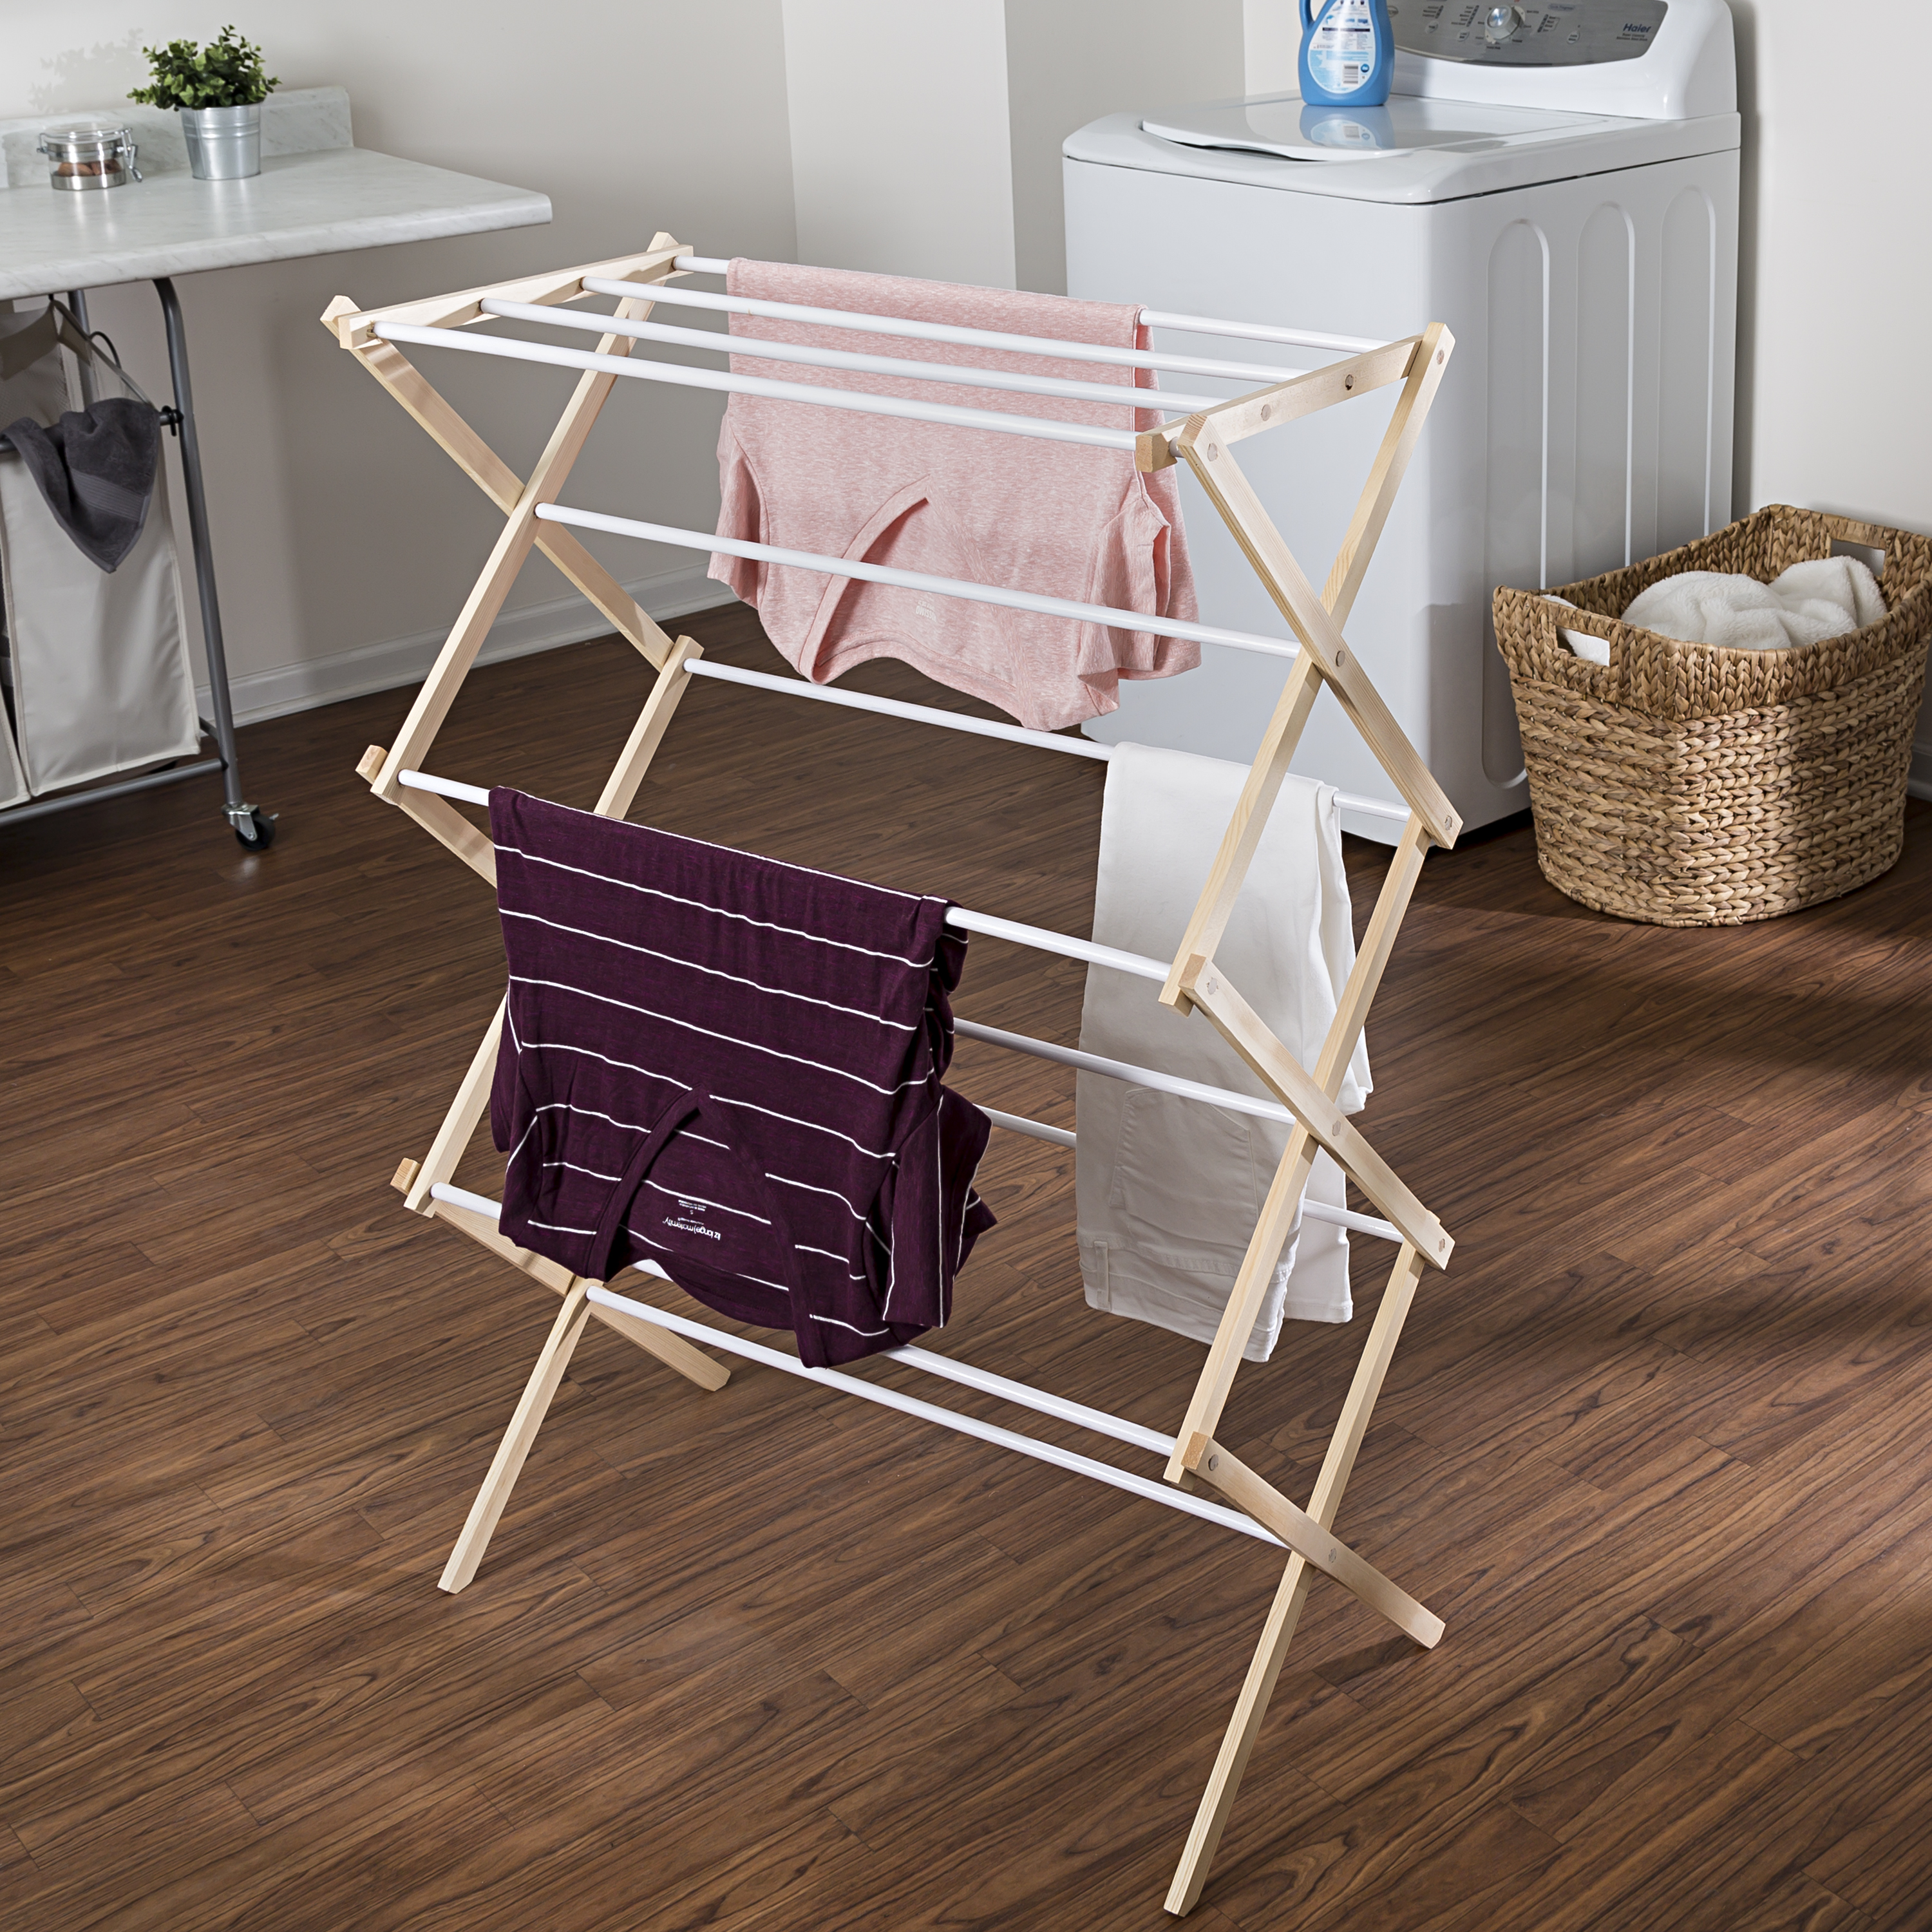 Honey Can Do Collapsible Wood Clothes Drying Rack - image 5 of 5